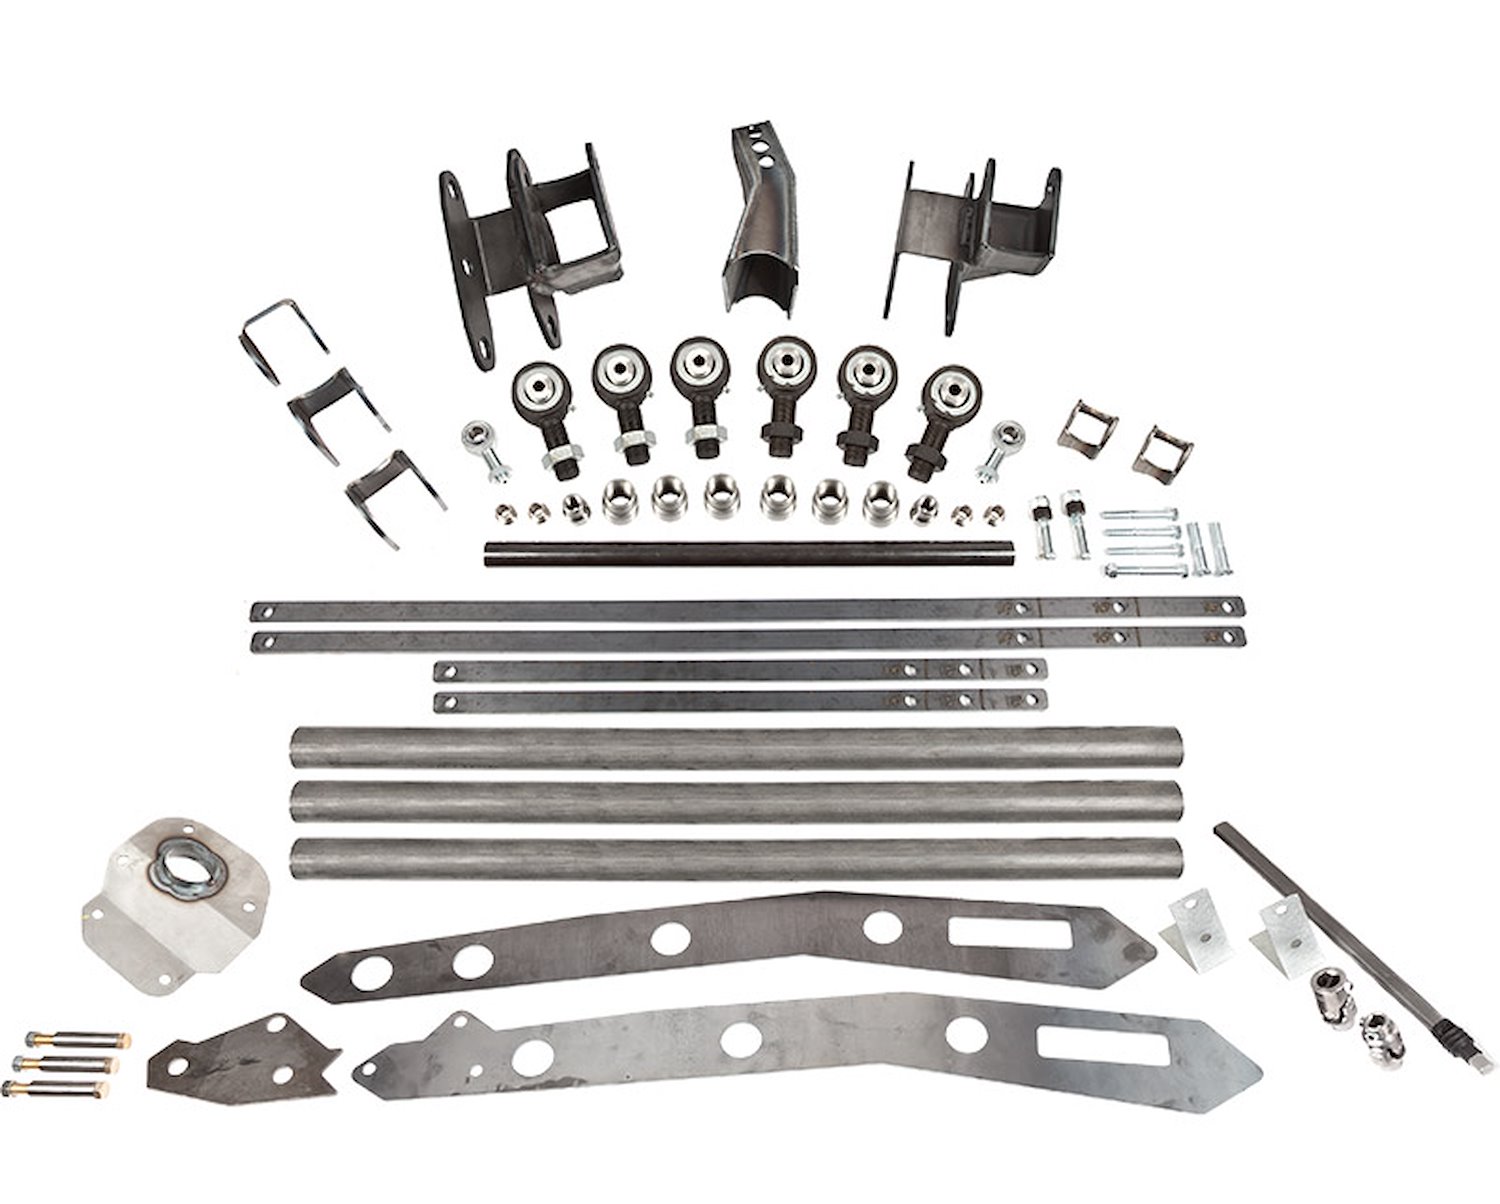 Trail-Link Three Front 3-Link Solid Axle Swap Kit 1996-04 Toyota Tacoma